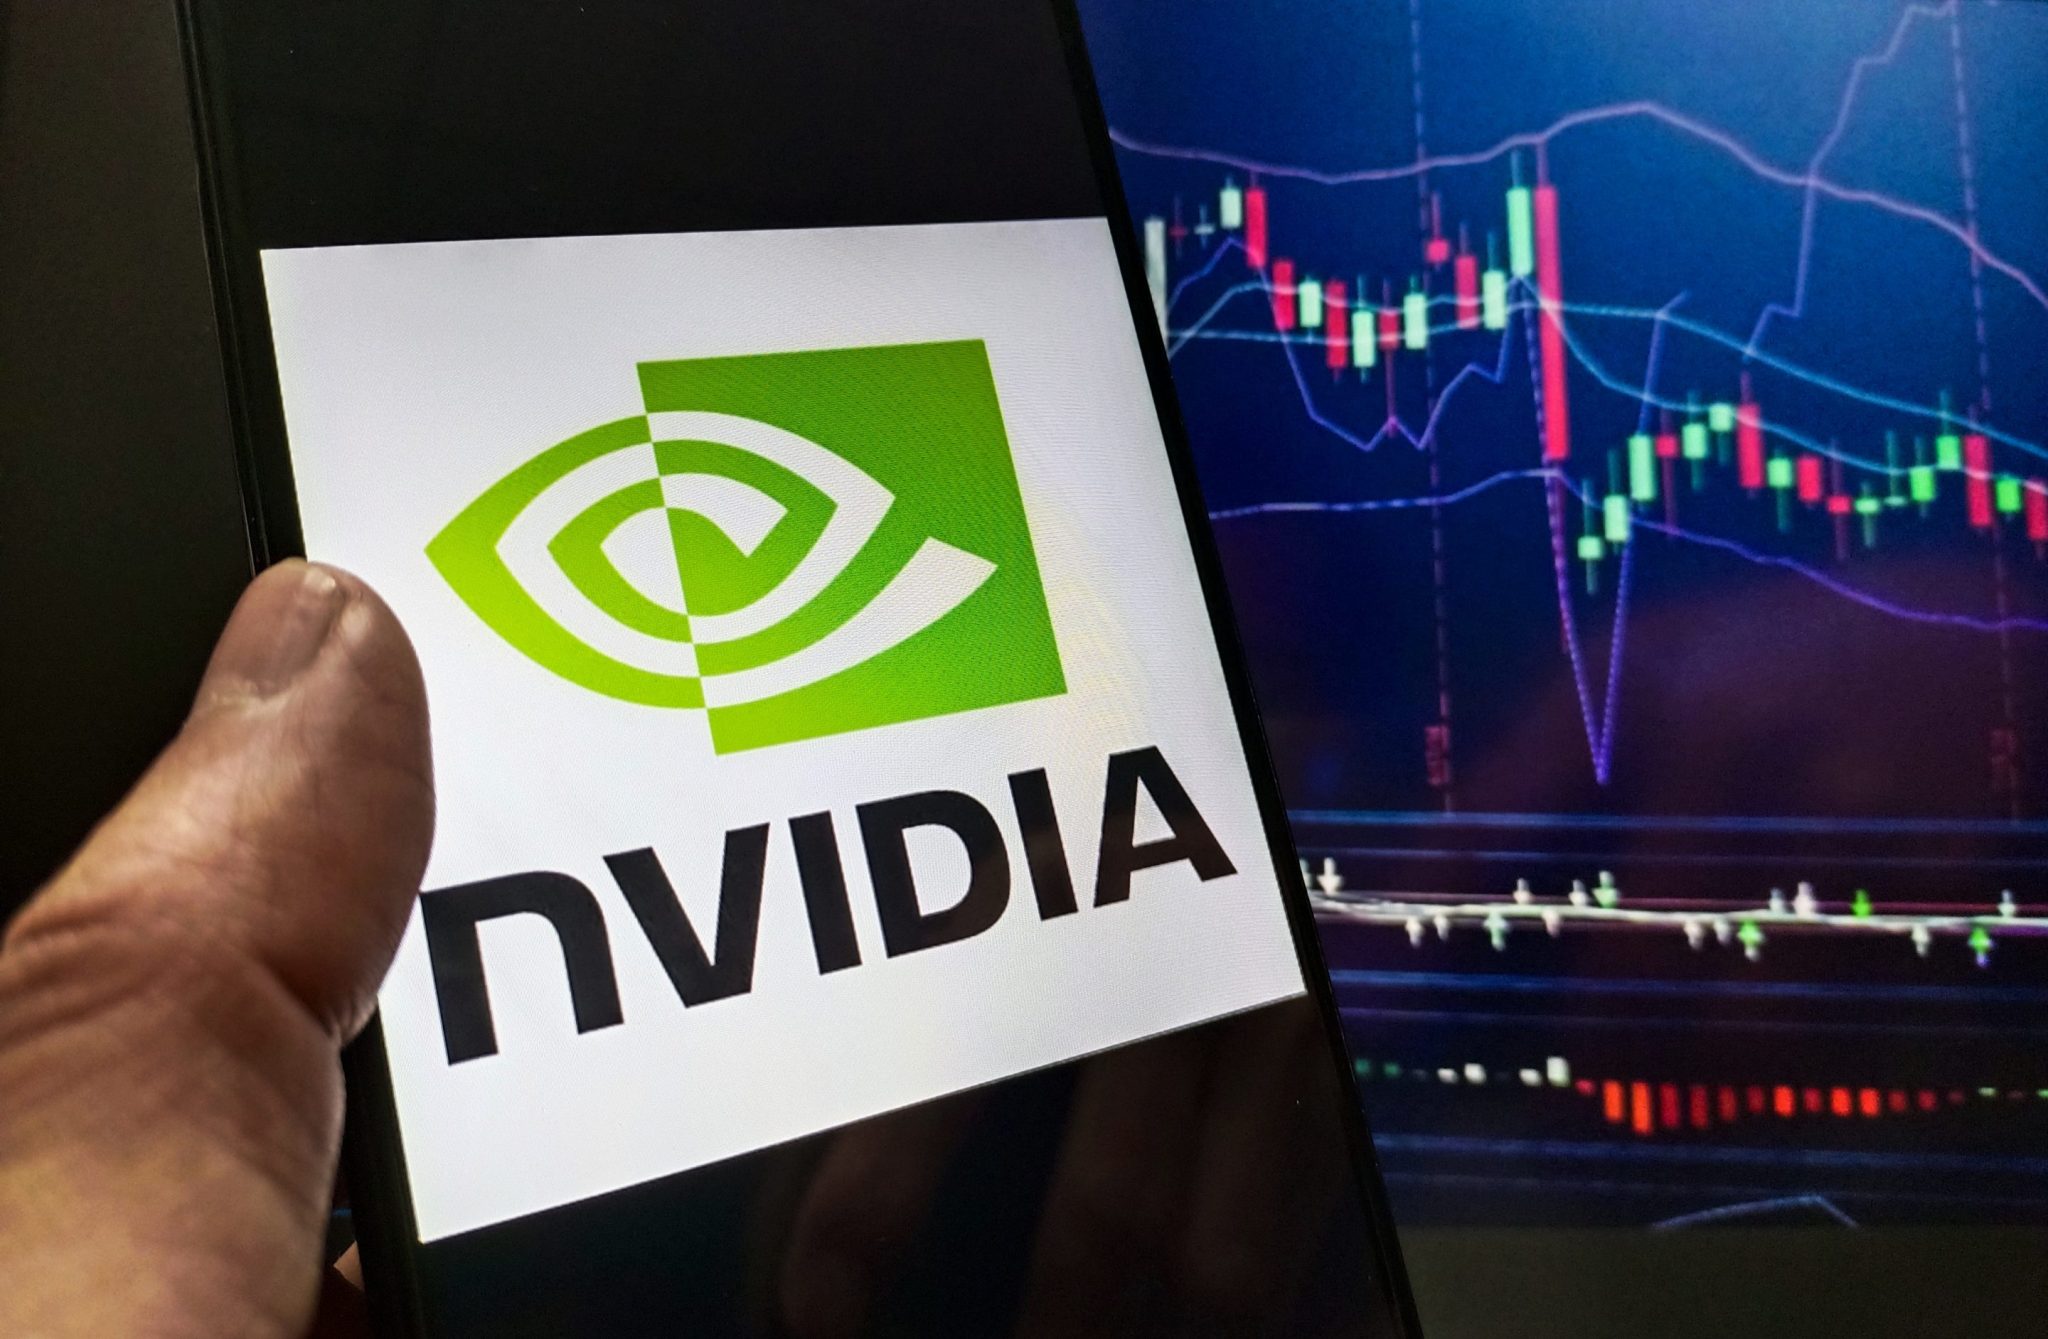 Nvidia earnings have been growing even faster than the stock